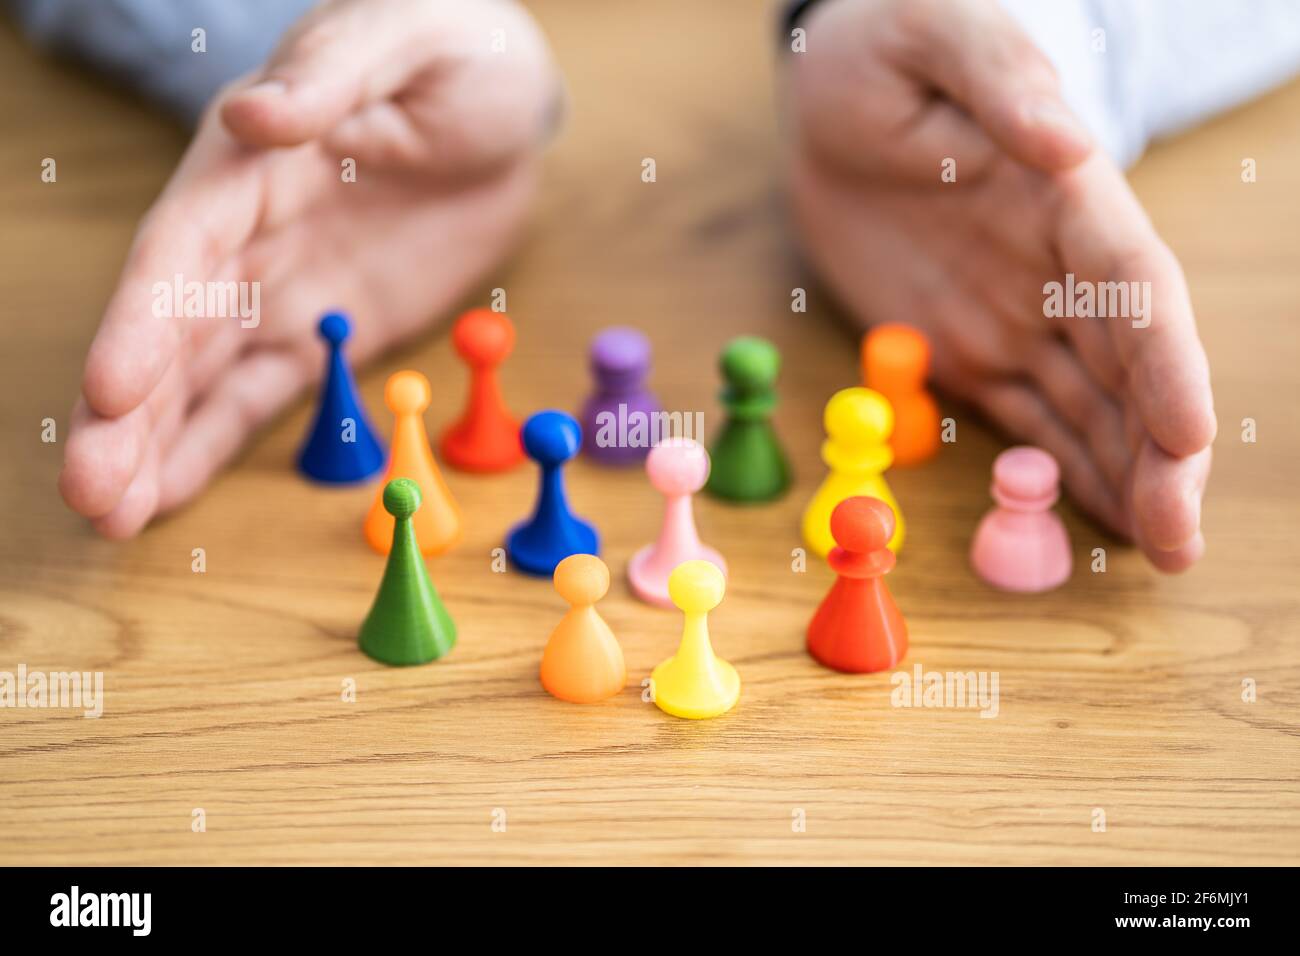 Diversity Equality And Inclusion Concept. Protecting Community Stock Photo